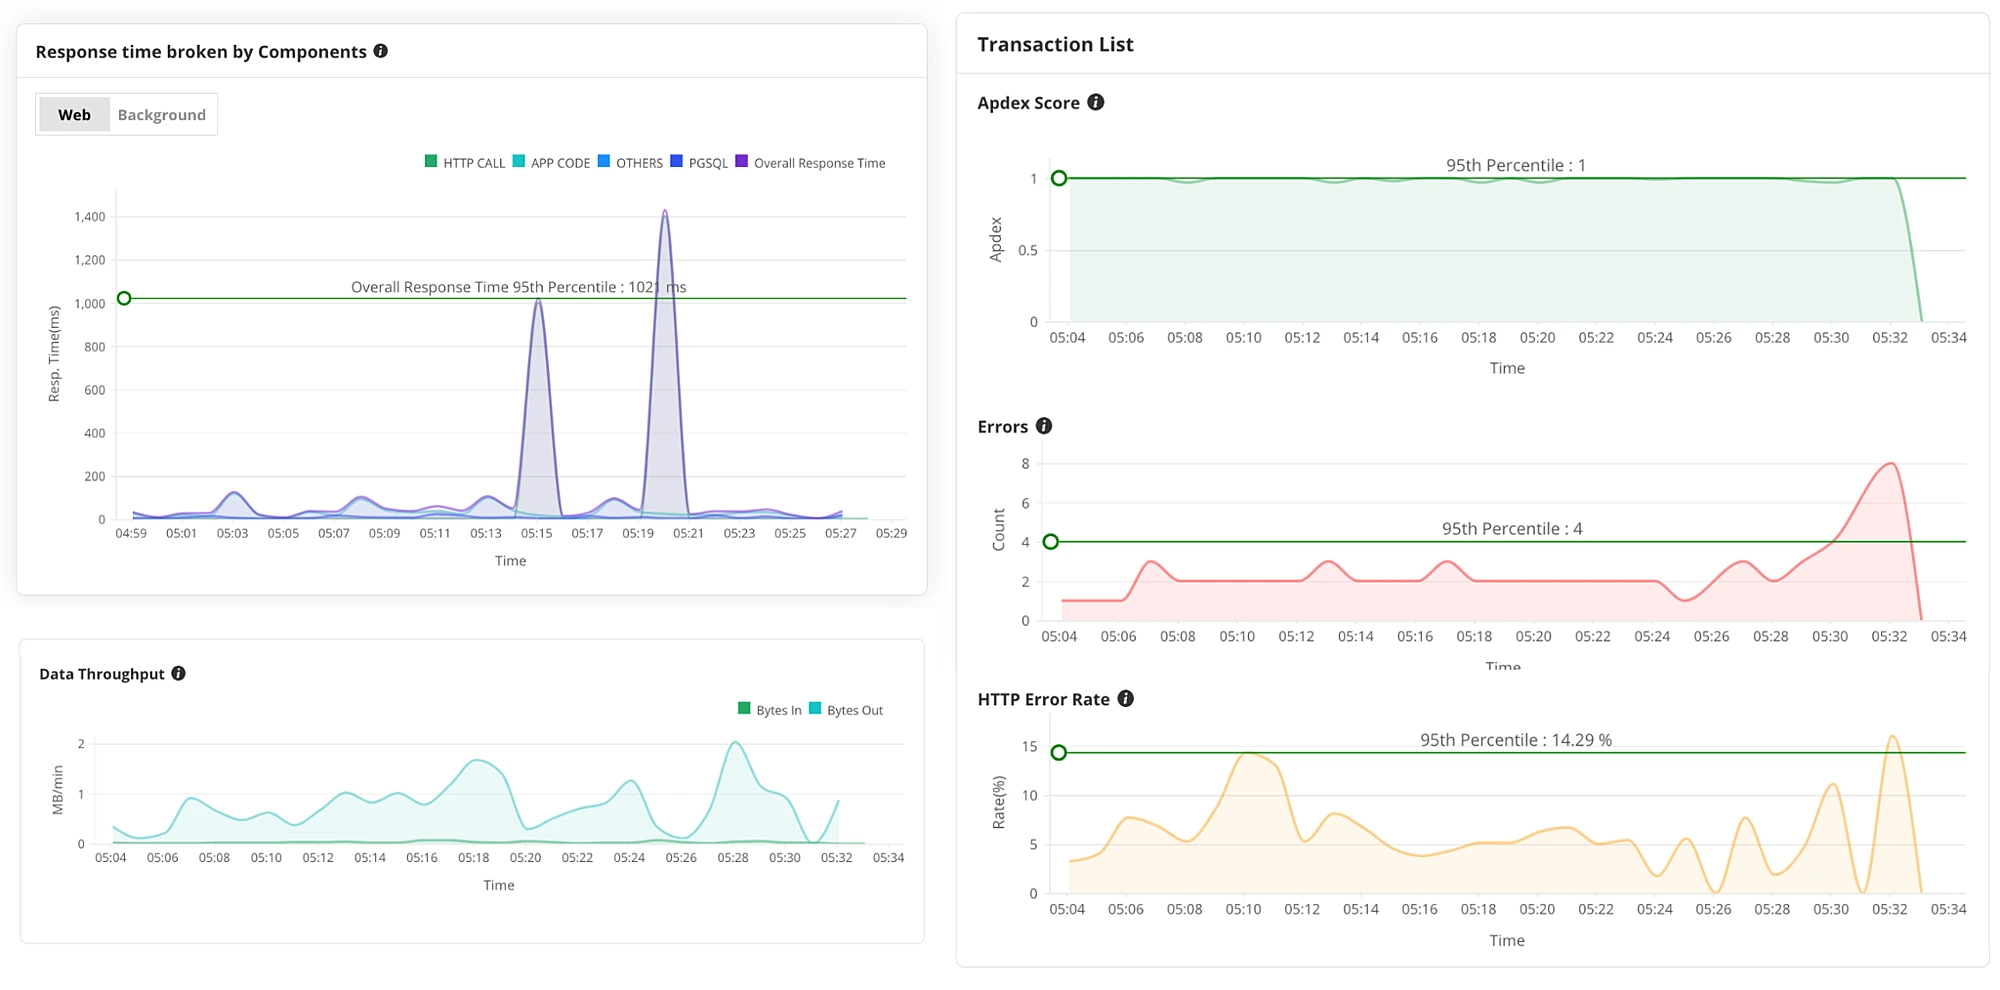 ManageEngine Applications Manager's application performance monitoring tools - response time, throughput, error rate, and apdex score